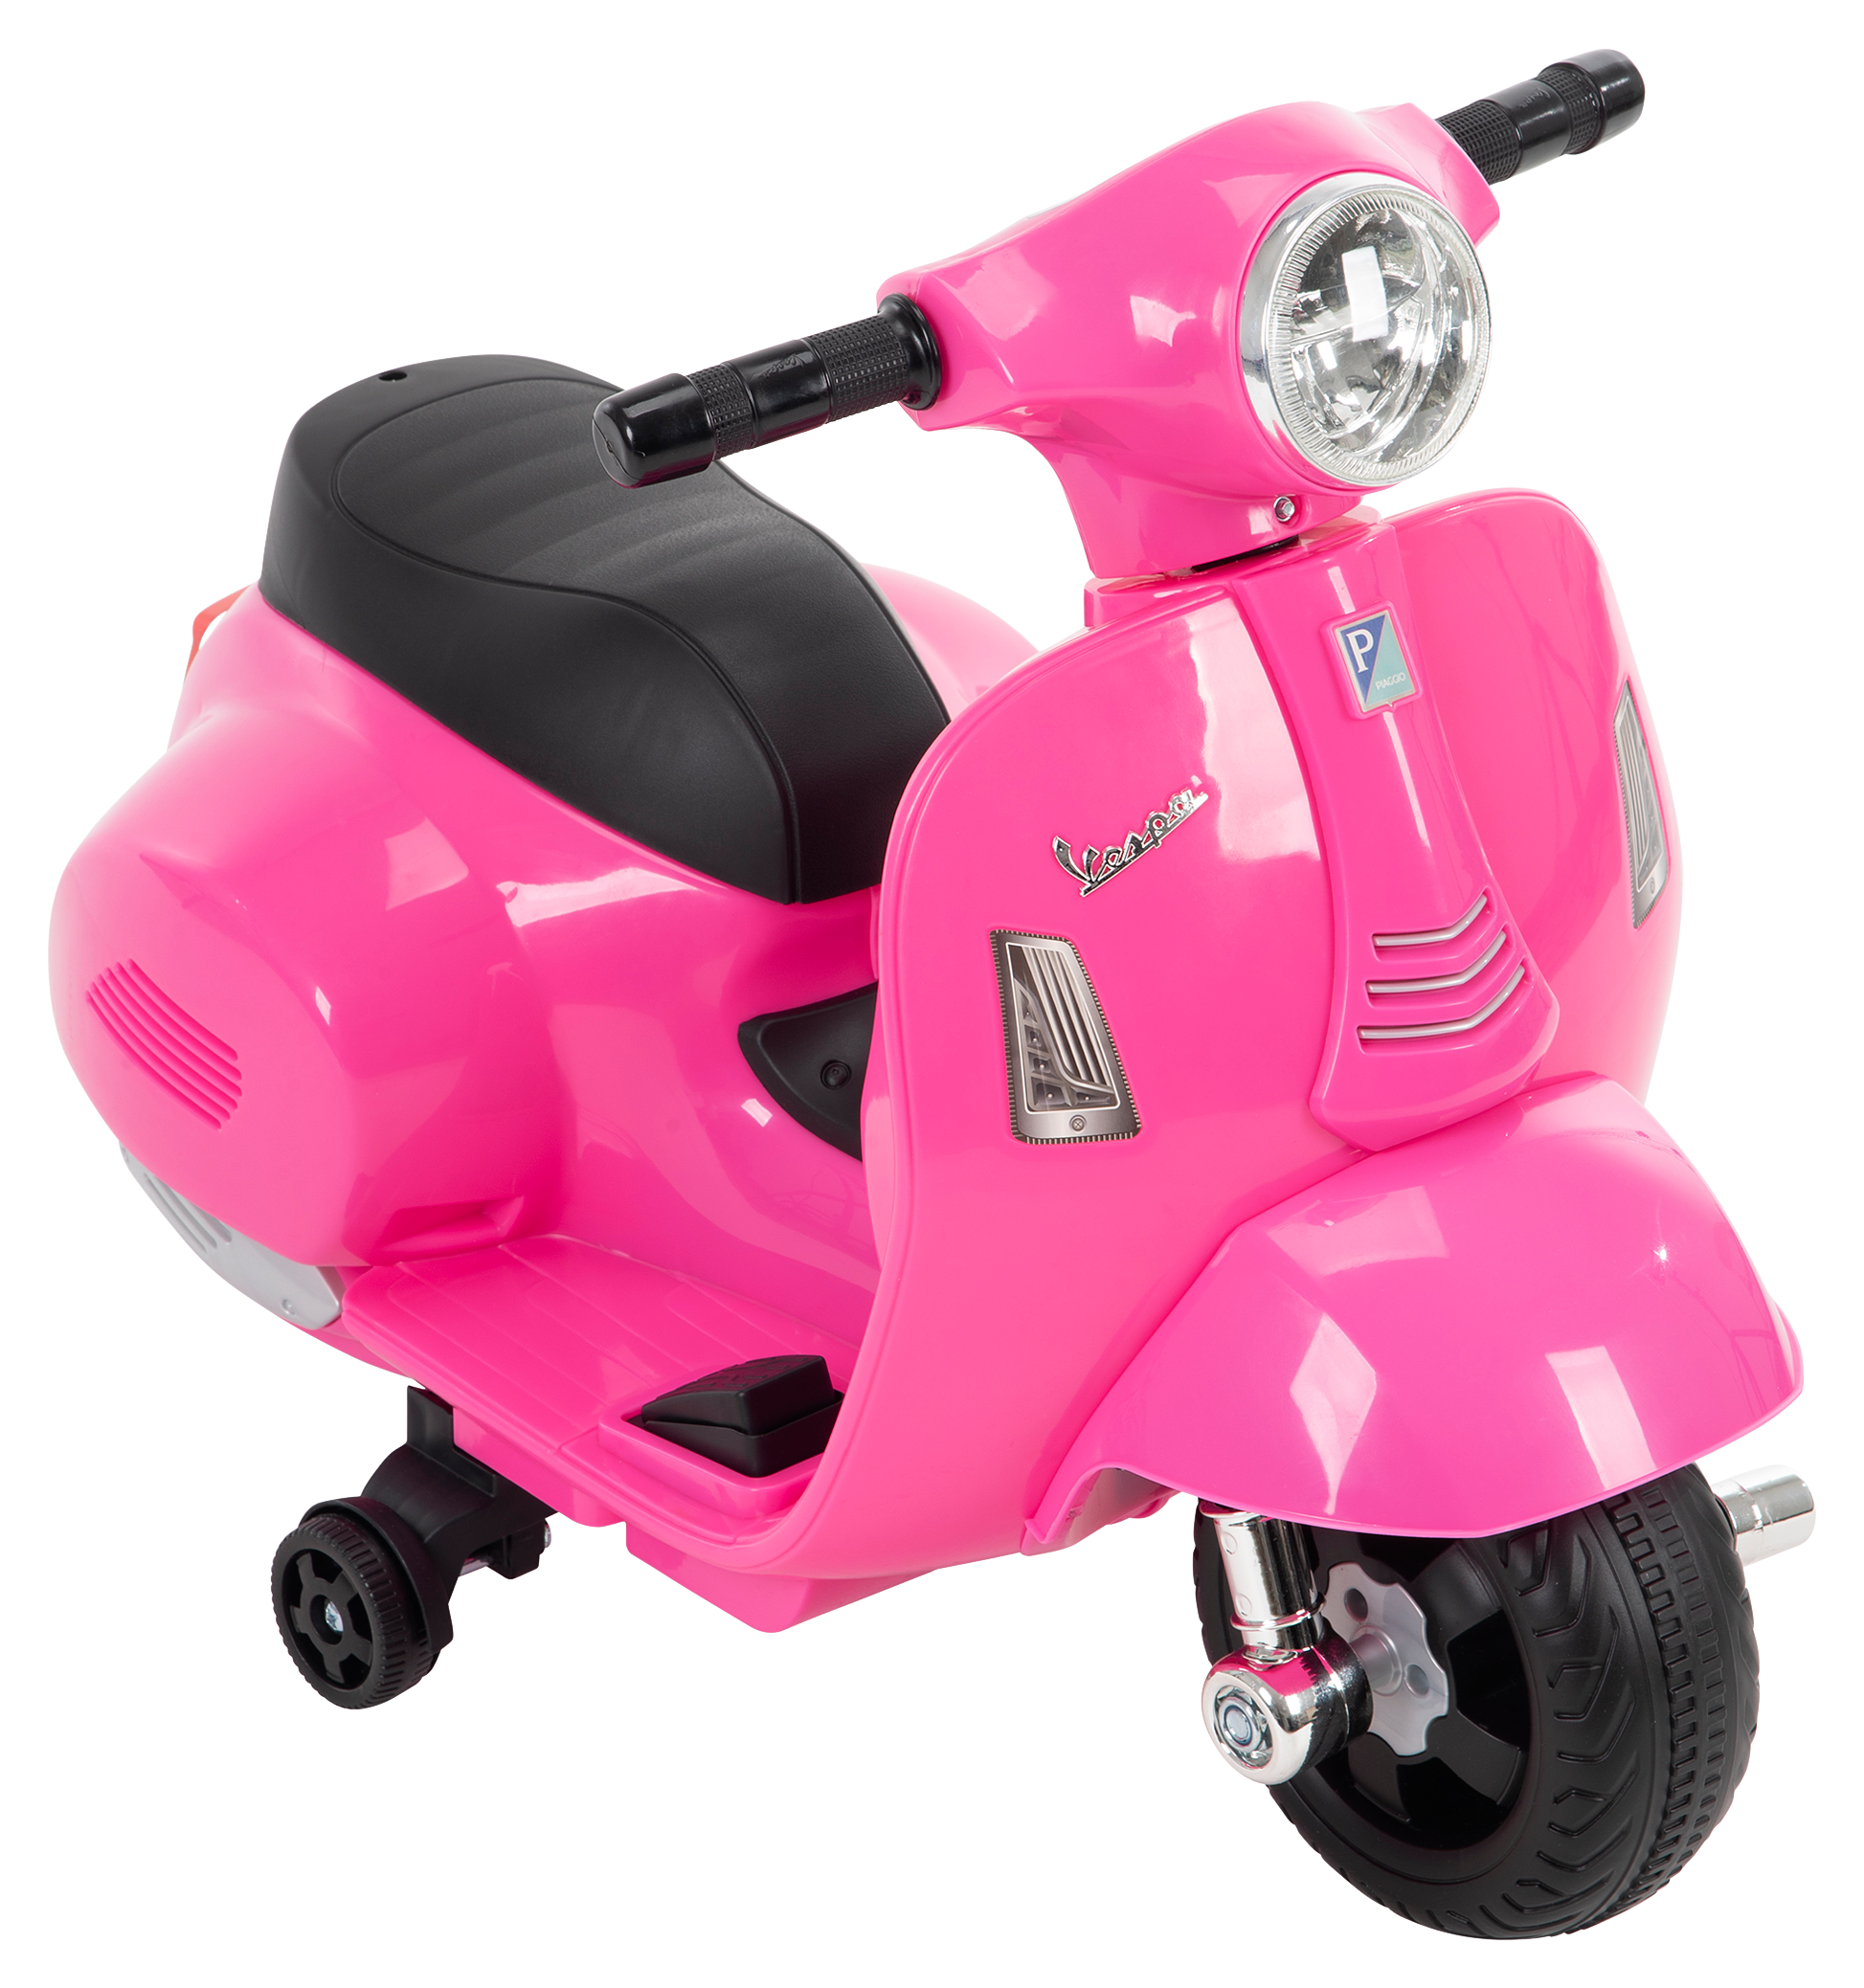 Huffy Vespa 6V Battery Ride-On Scooter for Toddlers - Pink